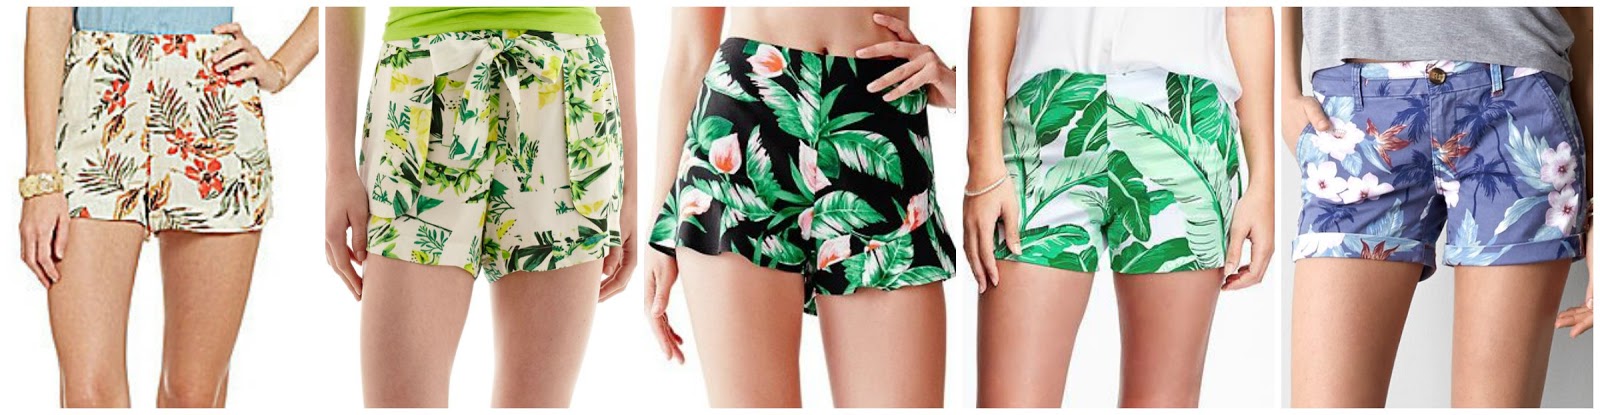 Wear It For Less: JAMIE CHUNG: PRINTED SHORTS